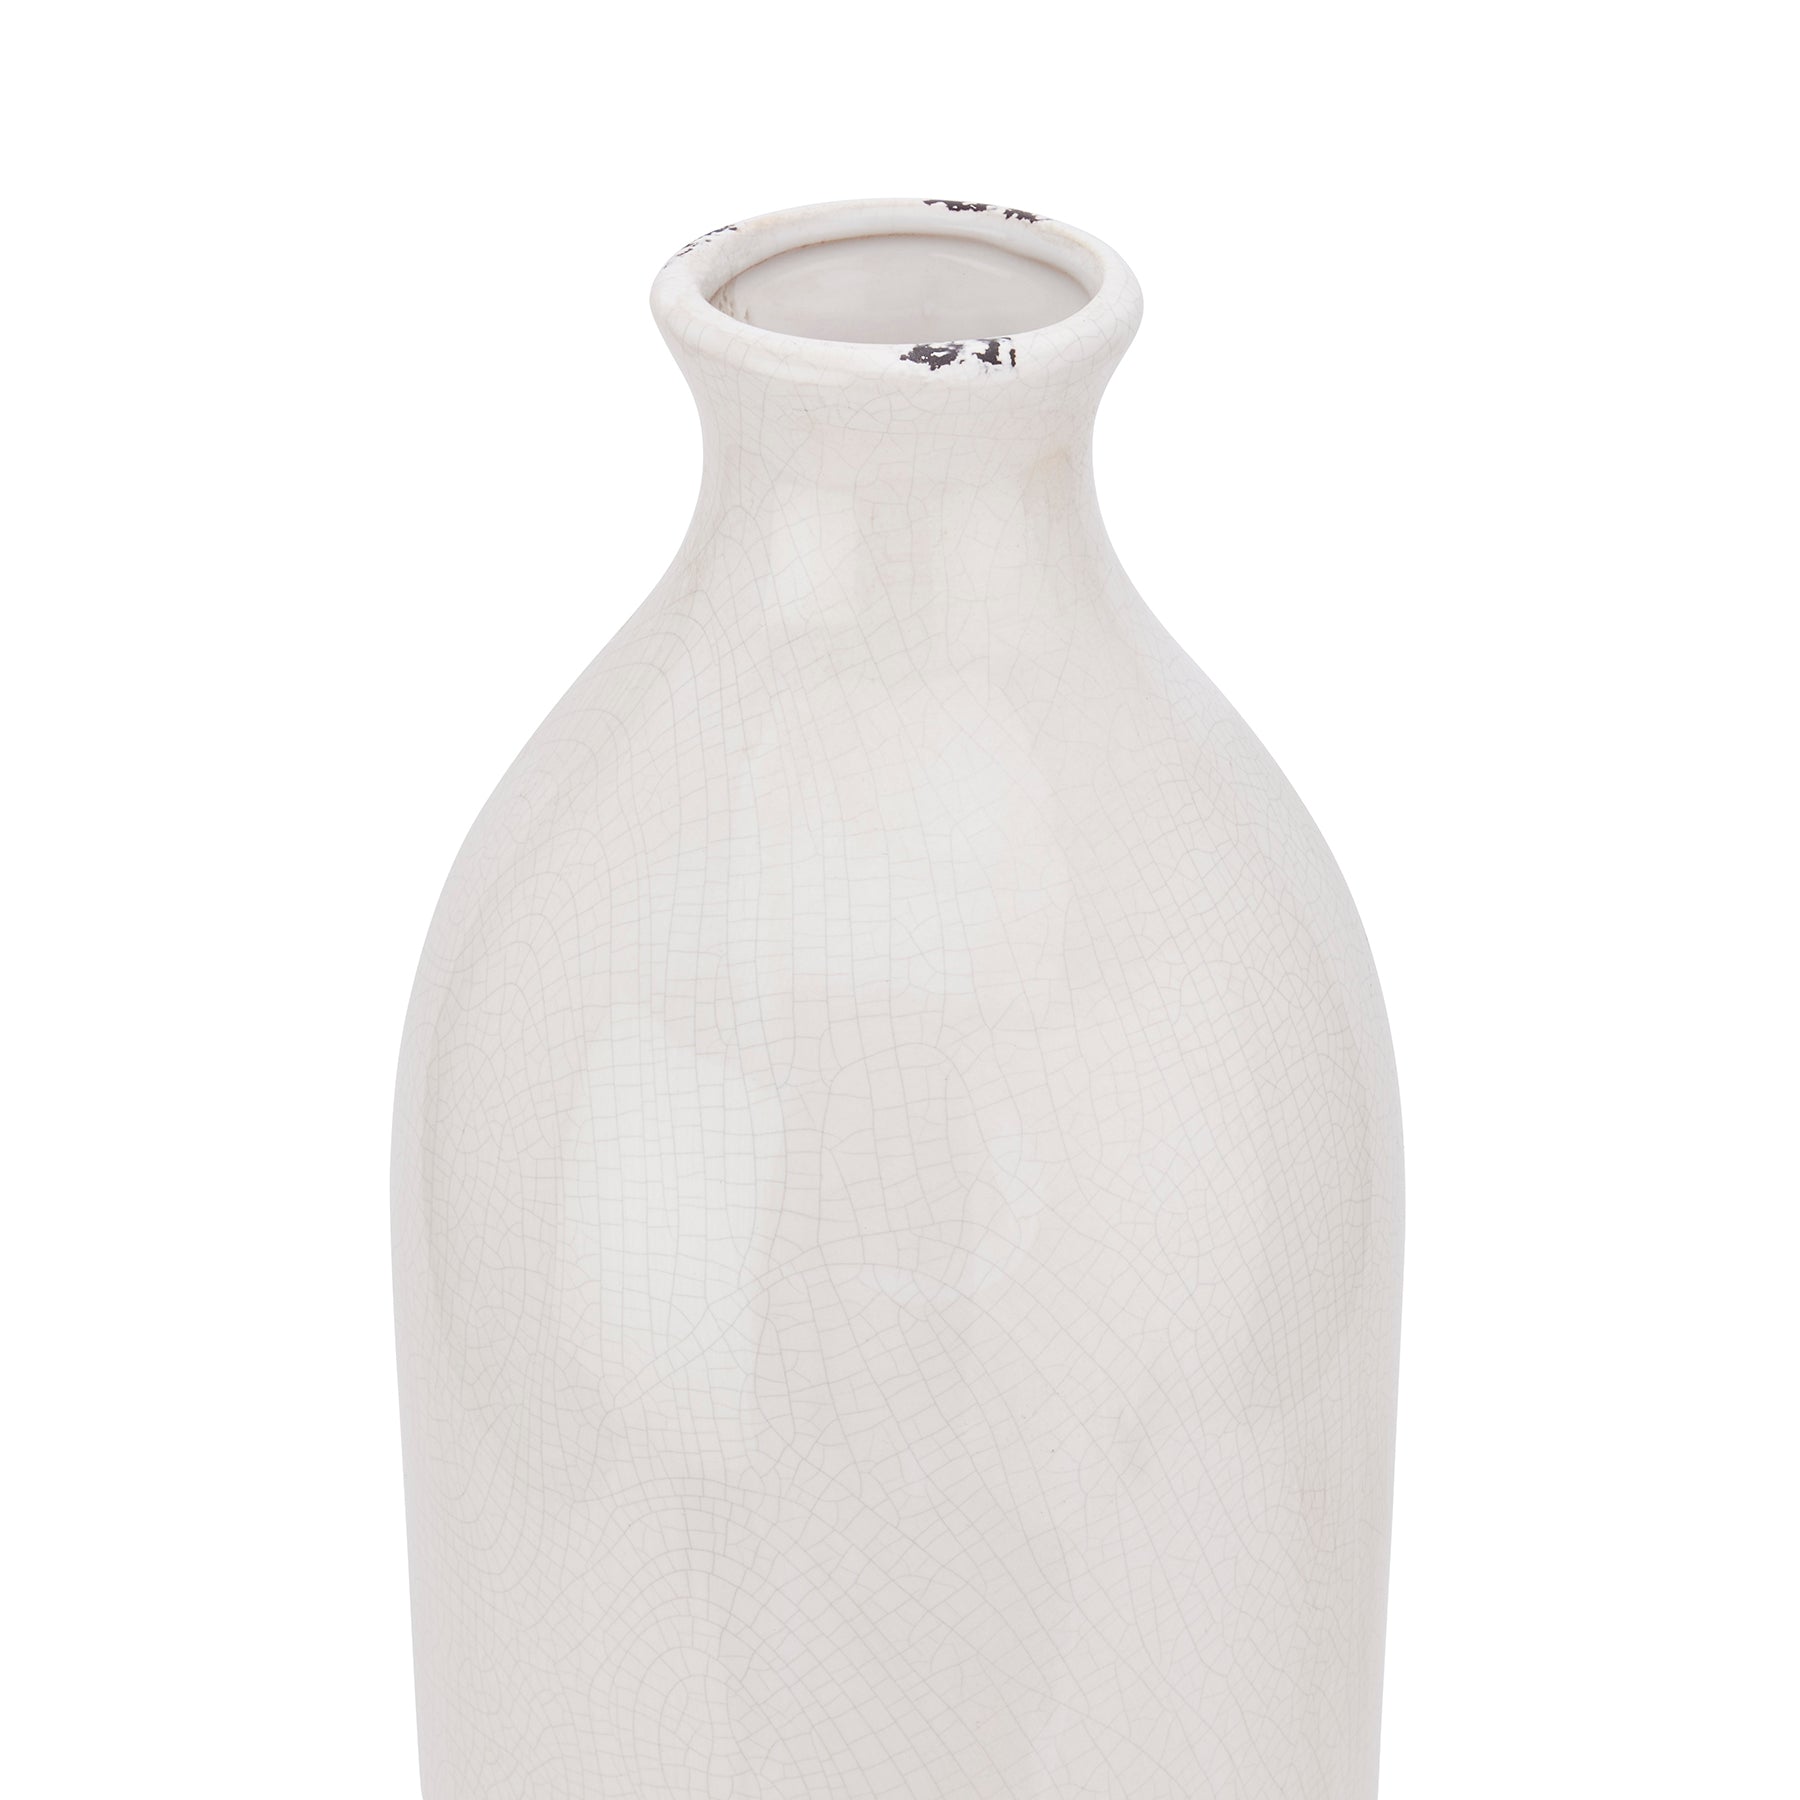 Distressed White Ceramic Narrow Neck Cyclinder Vase With Crackle Glaze – Click Style